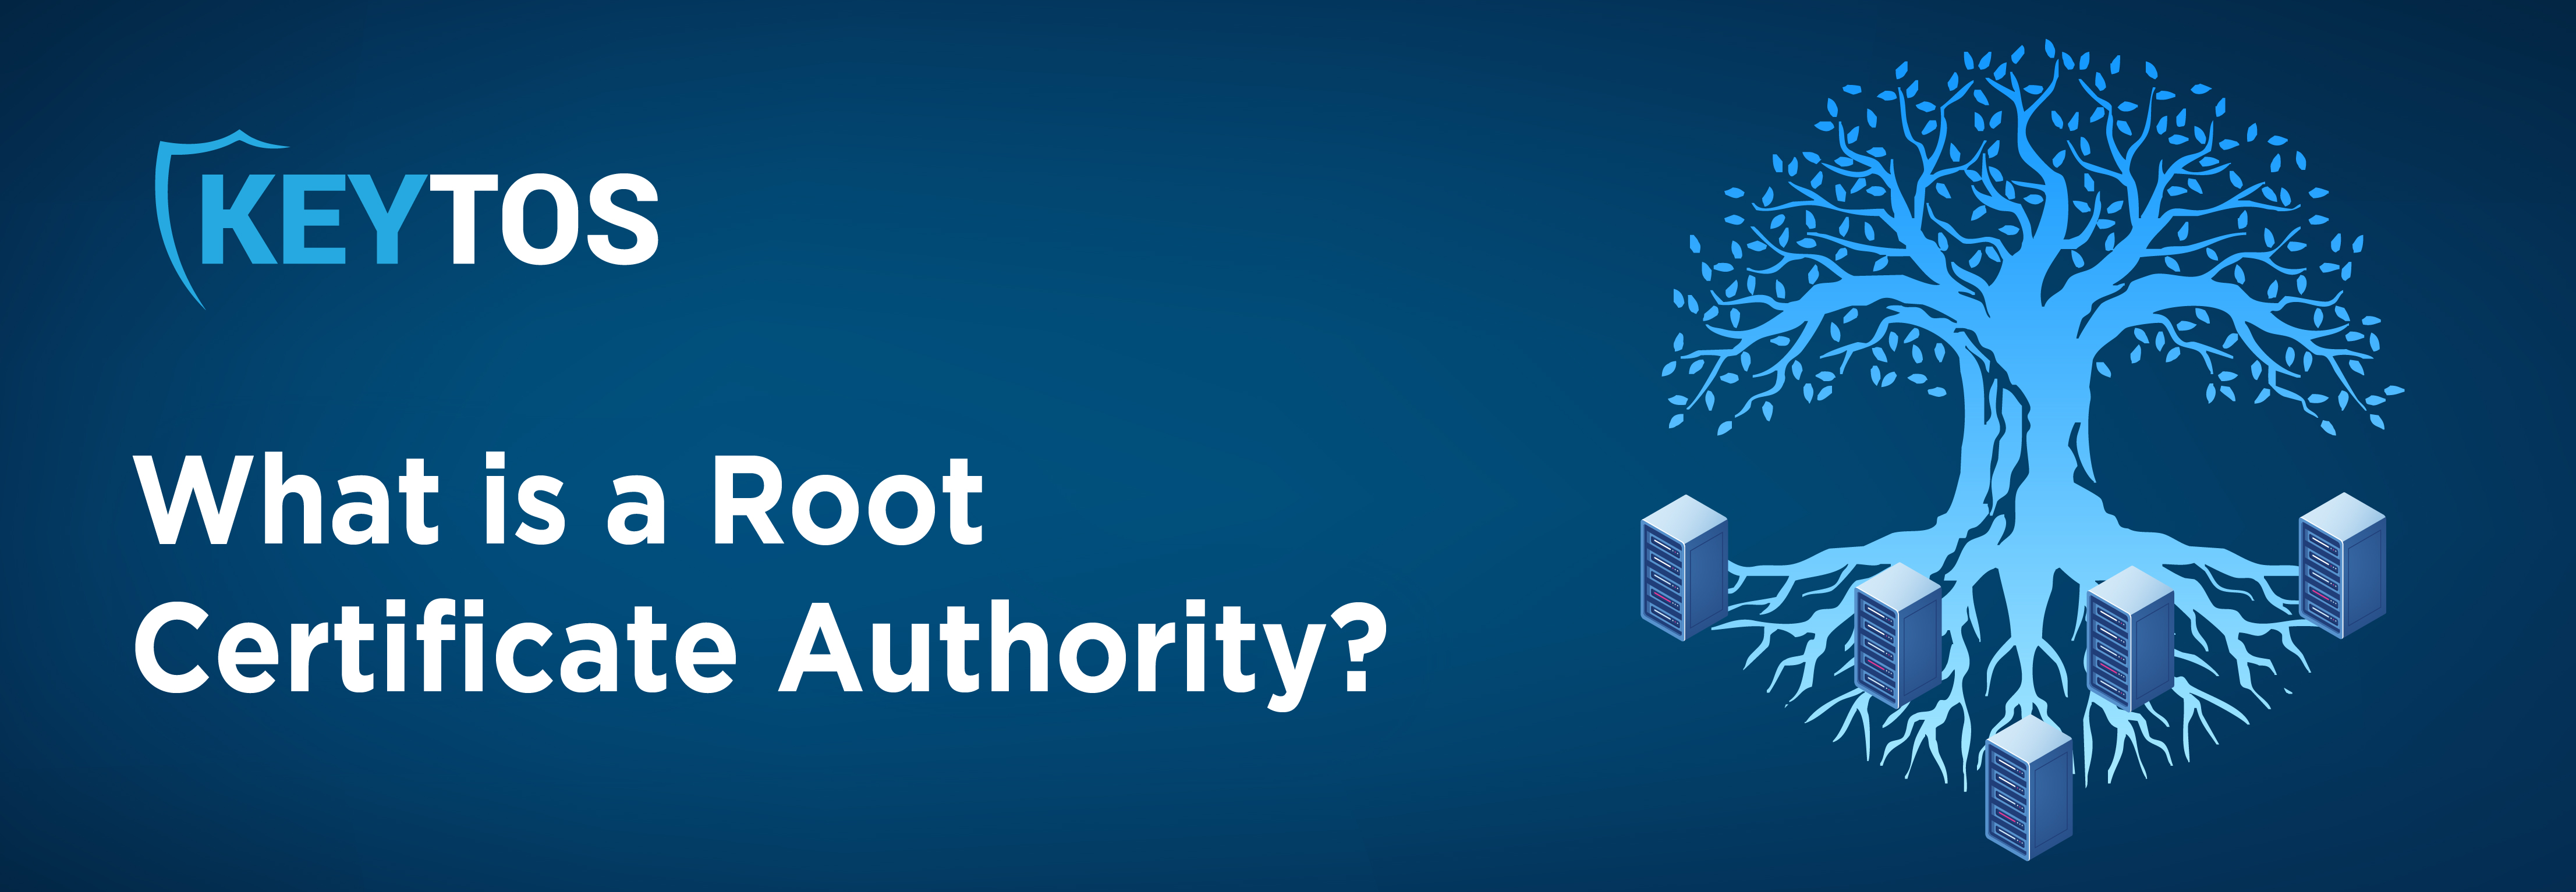 What is a Root Certificate Authority? What is a Root CA?